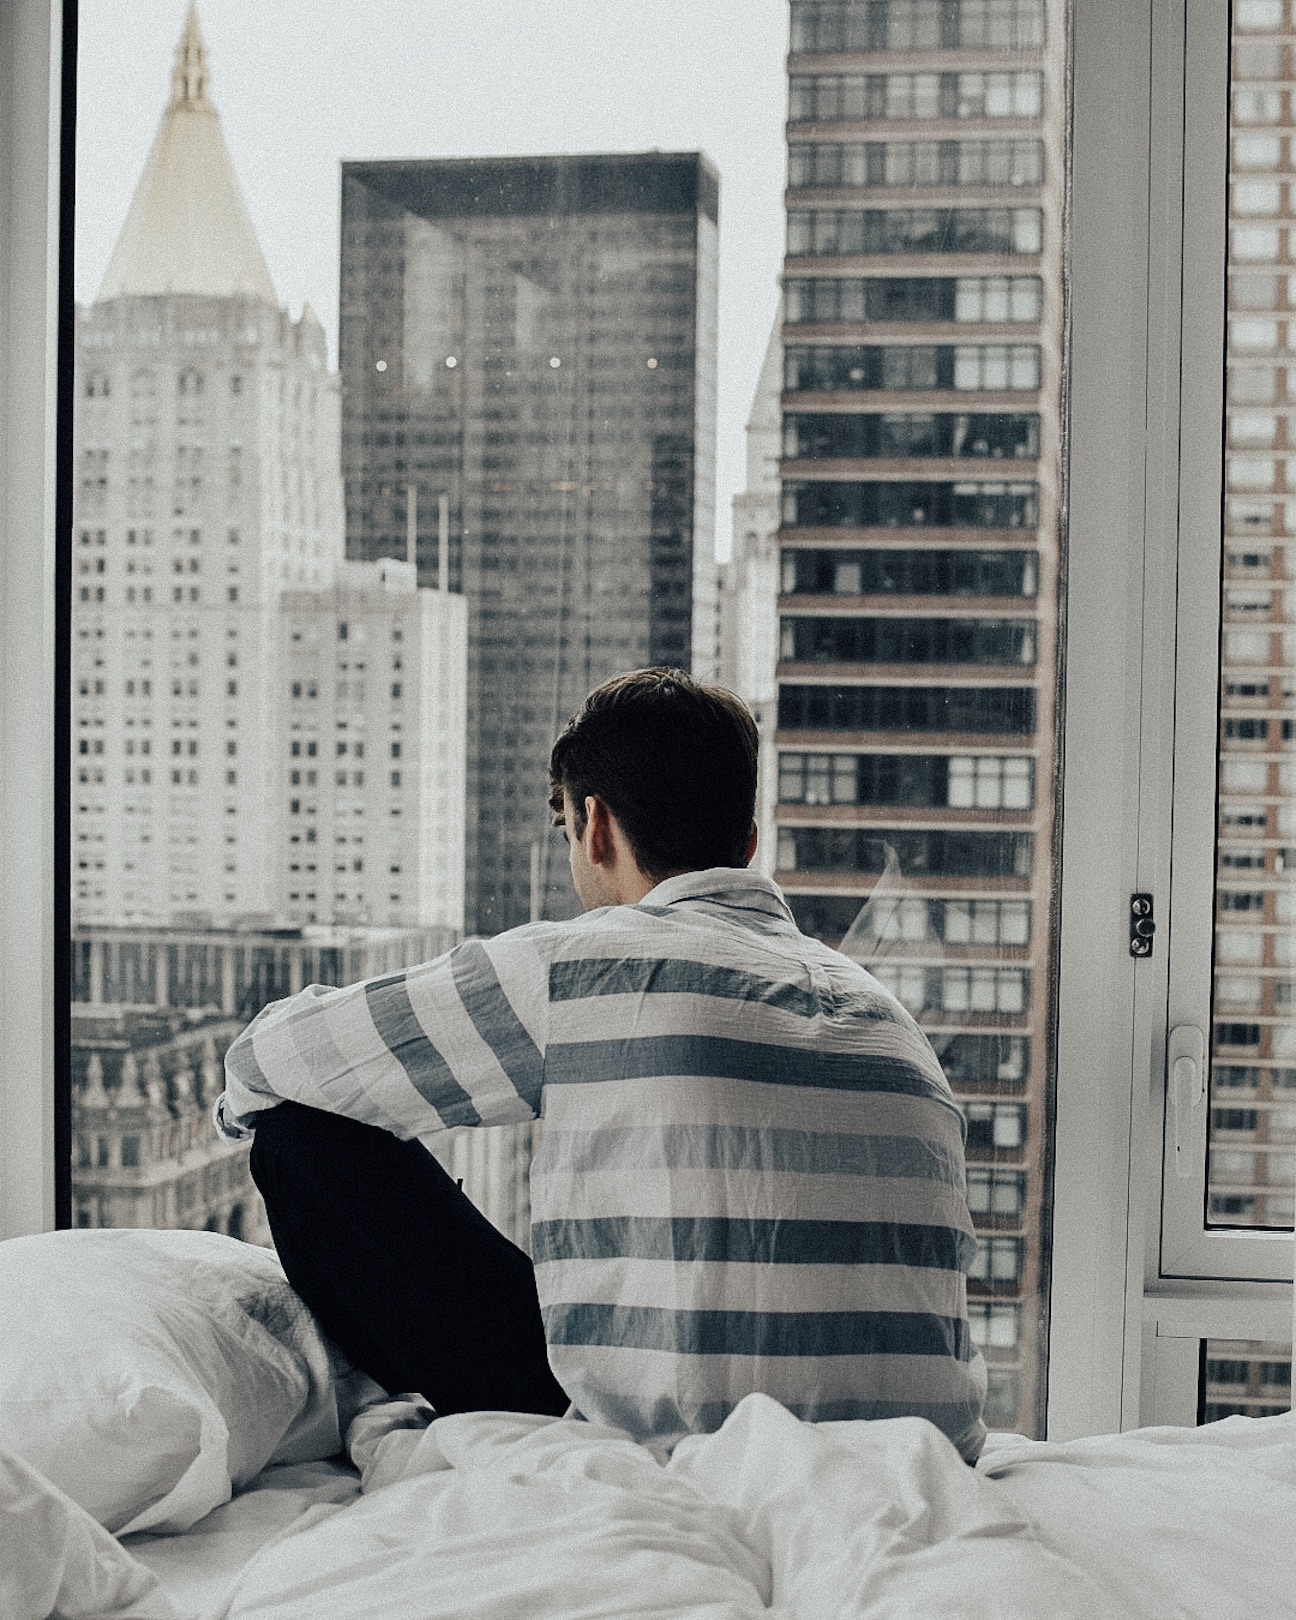 Man sitting on a bed looking out a window